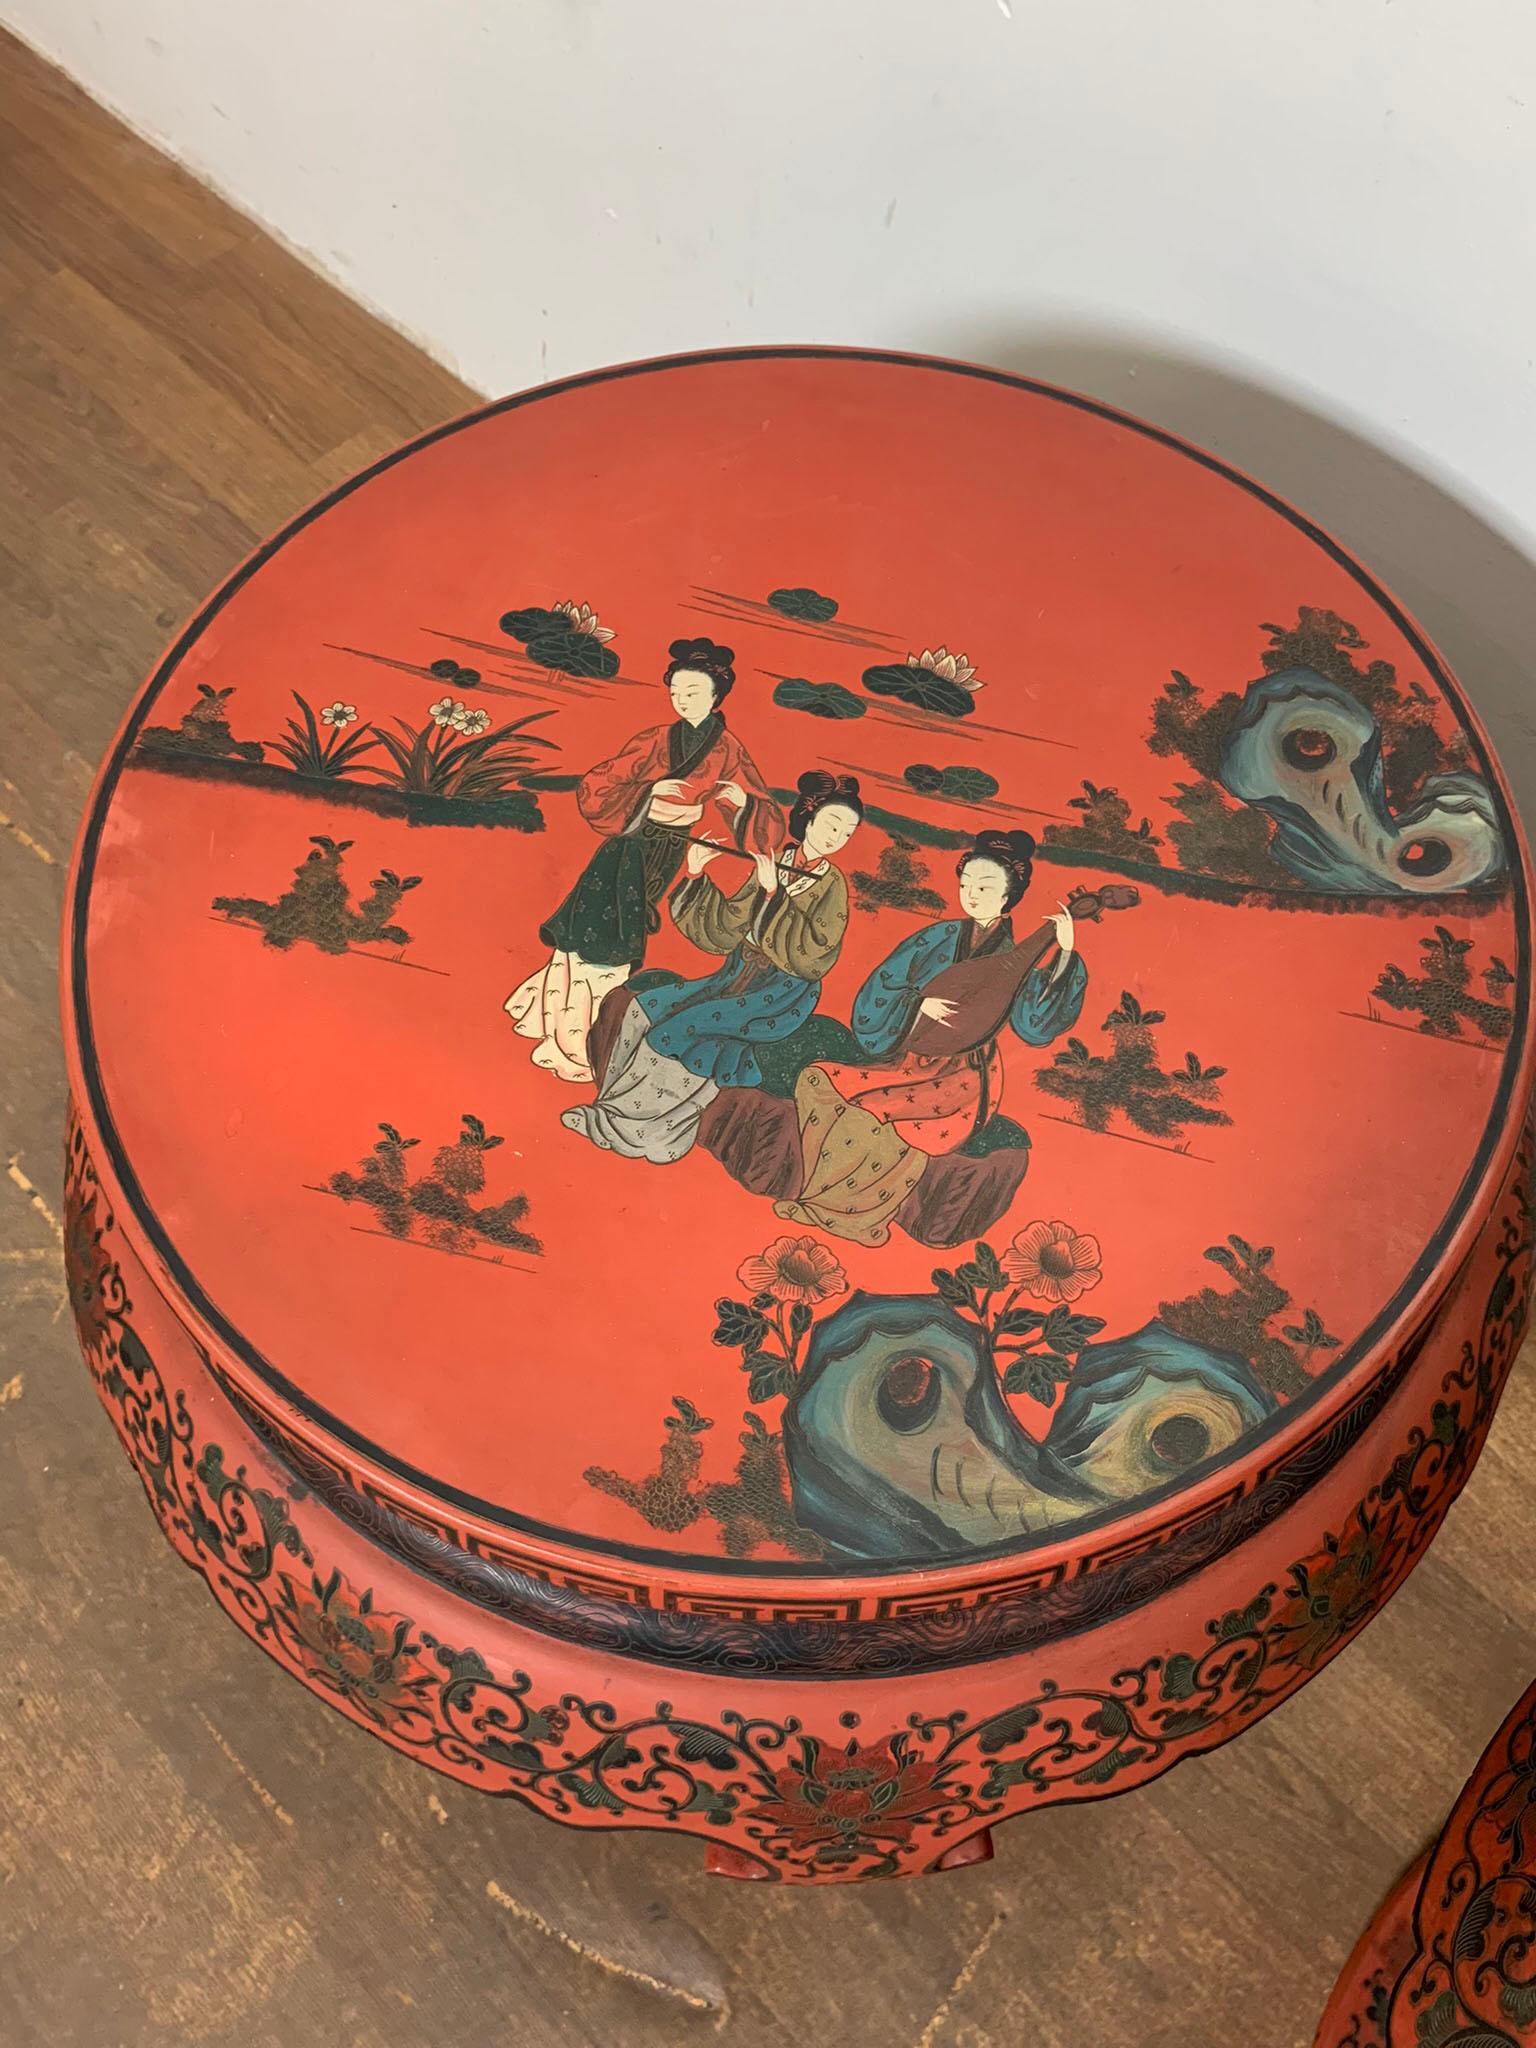 A pair of Chinese lacquered Zuodun drum tables from the late Qing dynasty, approximately ca. 1900.

Overall diameter is 23.75